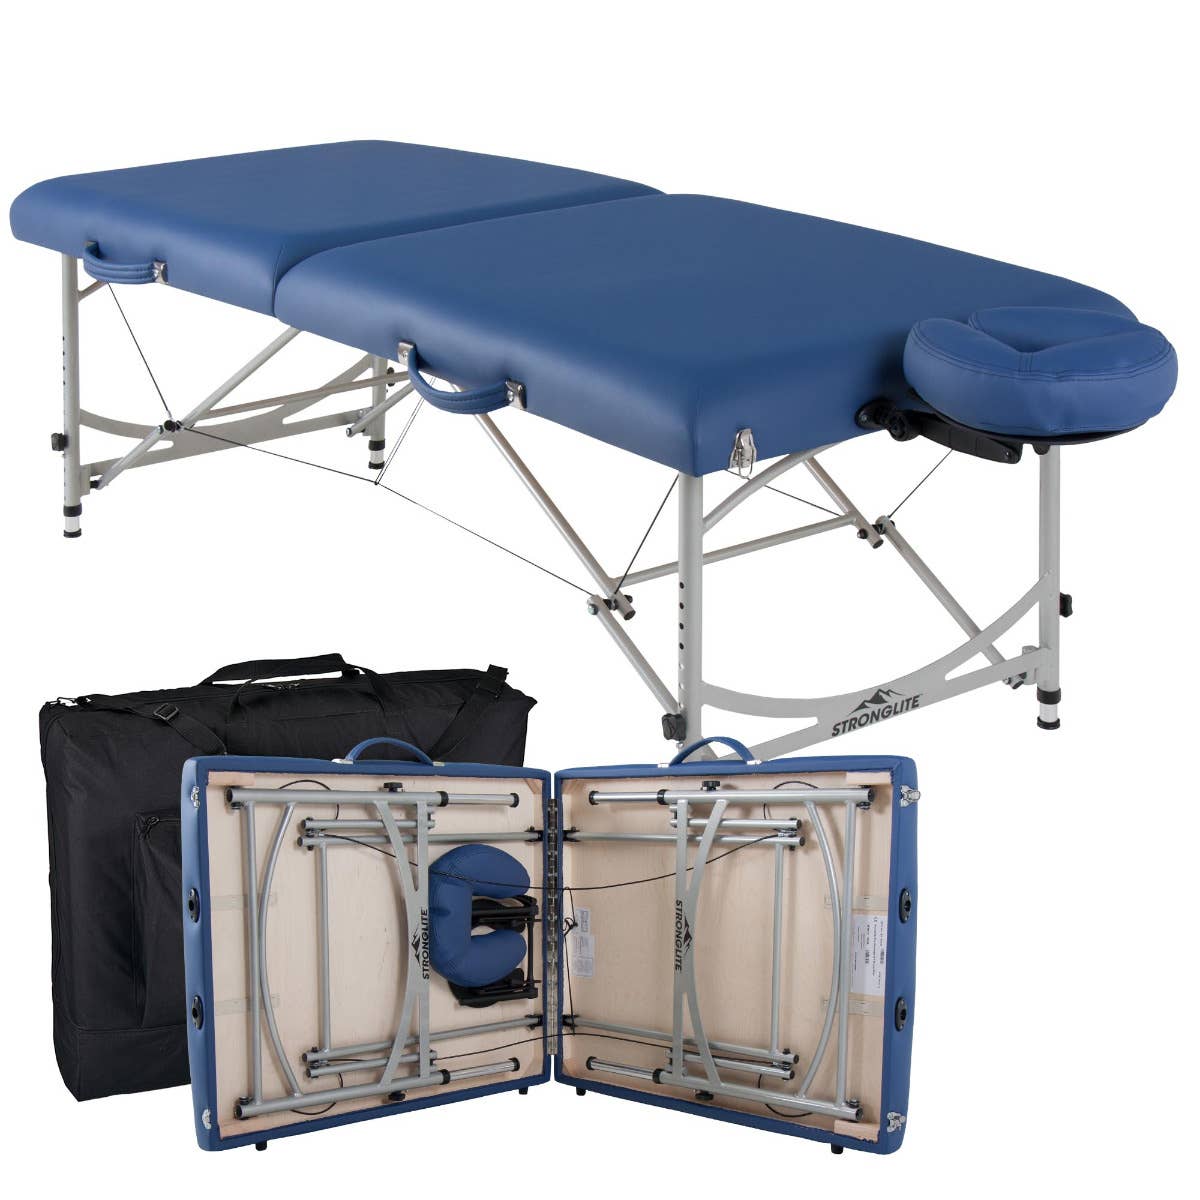 Versalite Pro table shipping configuration with accessories stored inside the table. 